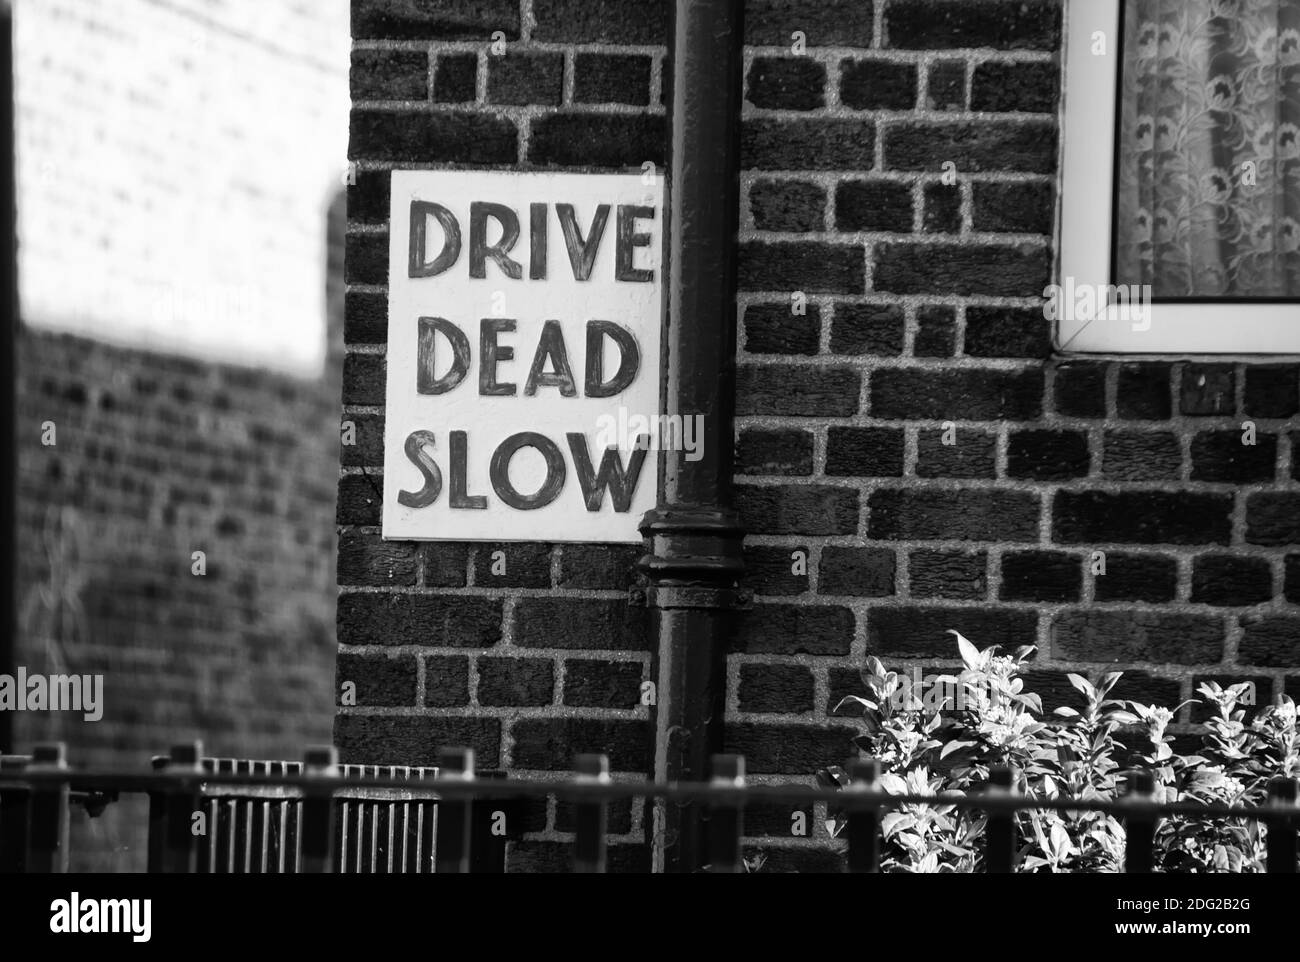 Drive Dead Slow Sign Stock Photo